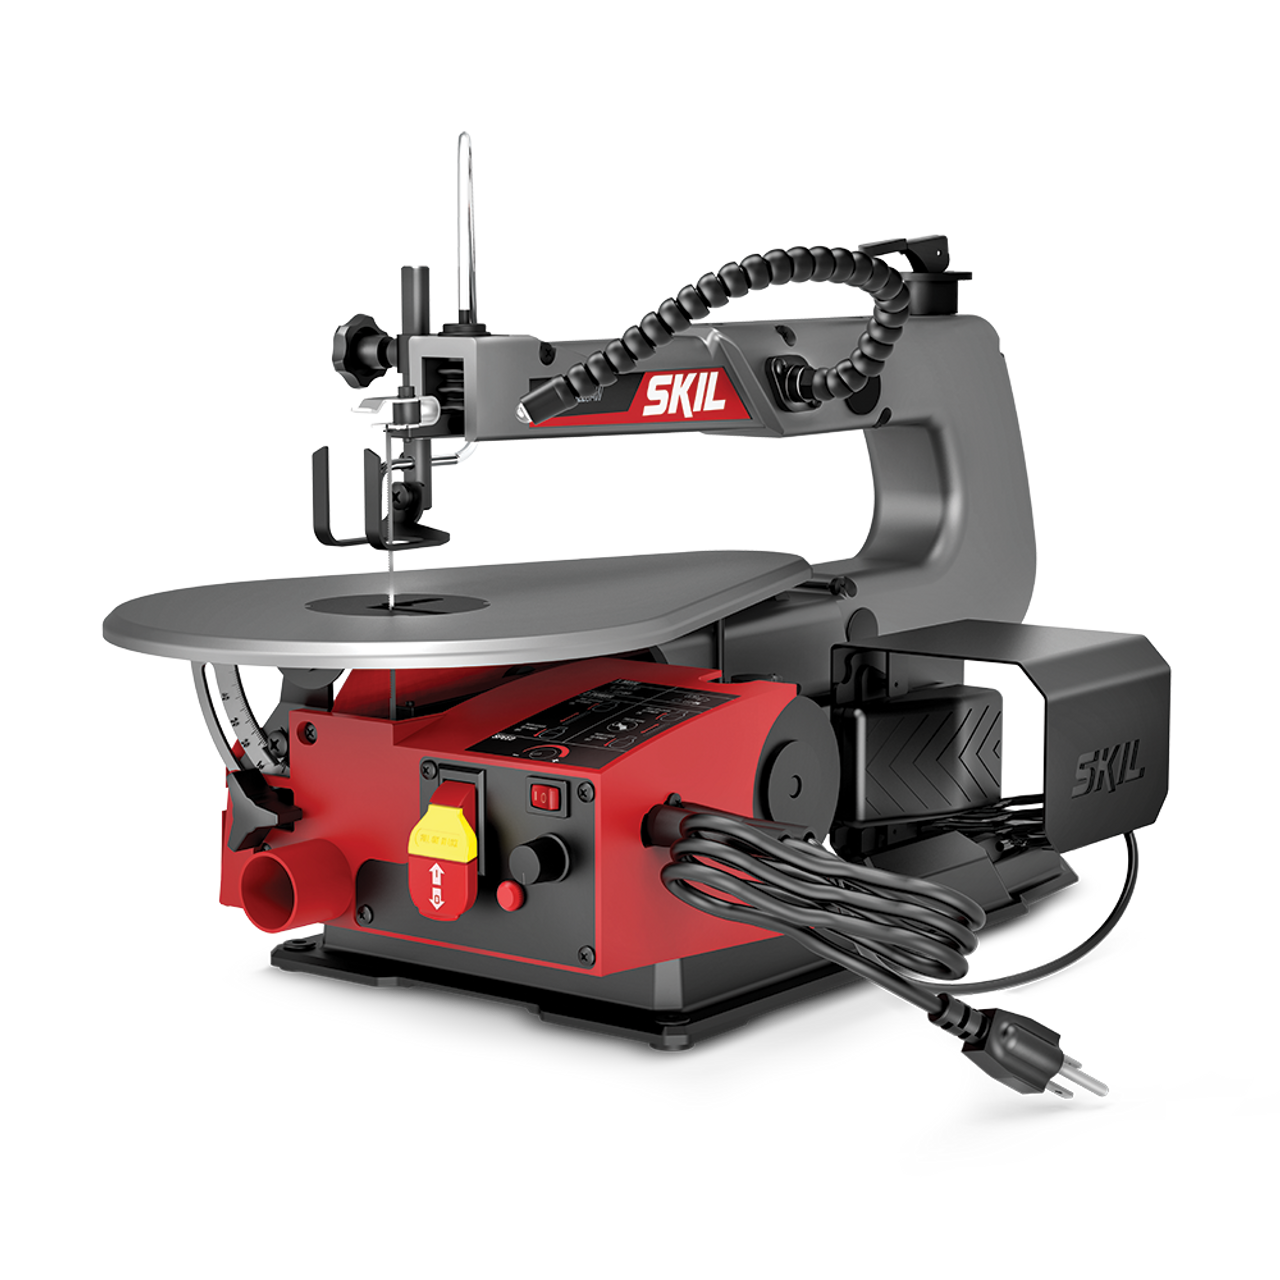 1.2 Amp 16 In. Variable Speed Scroll Saw